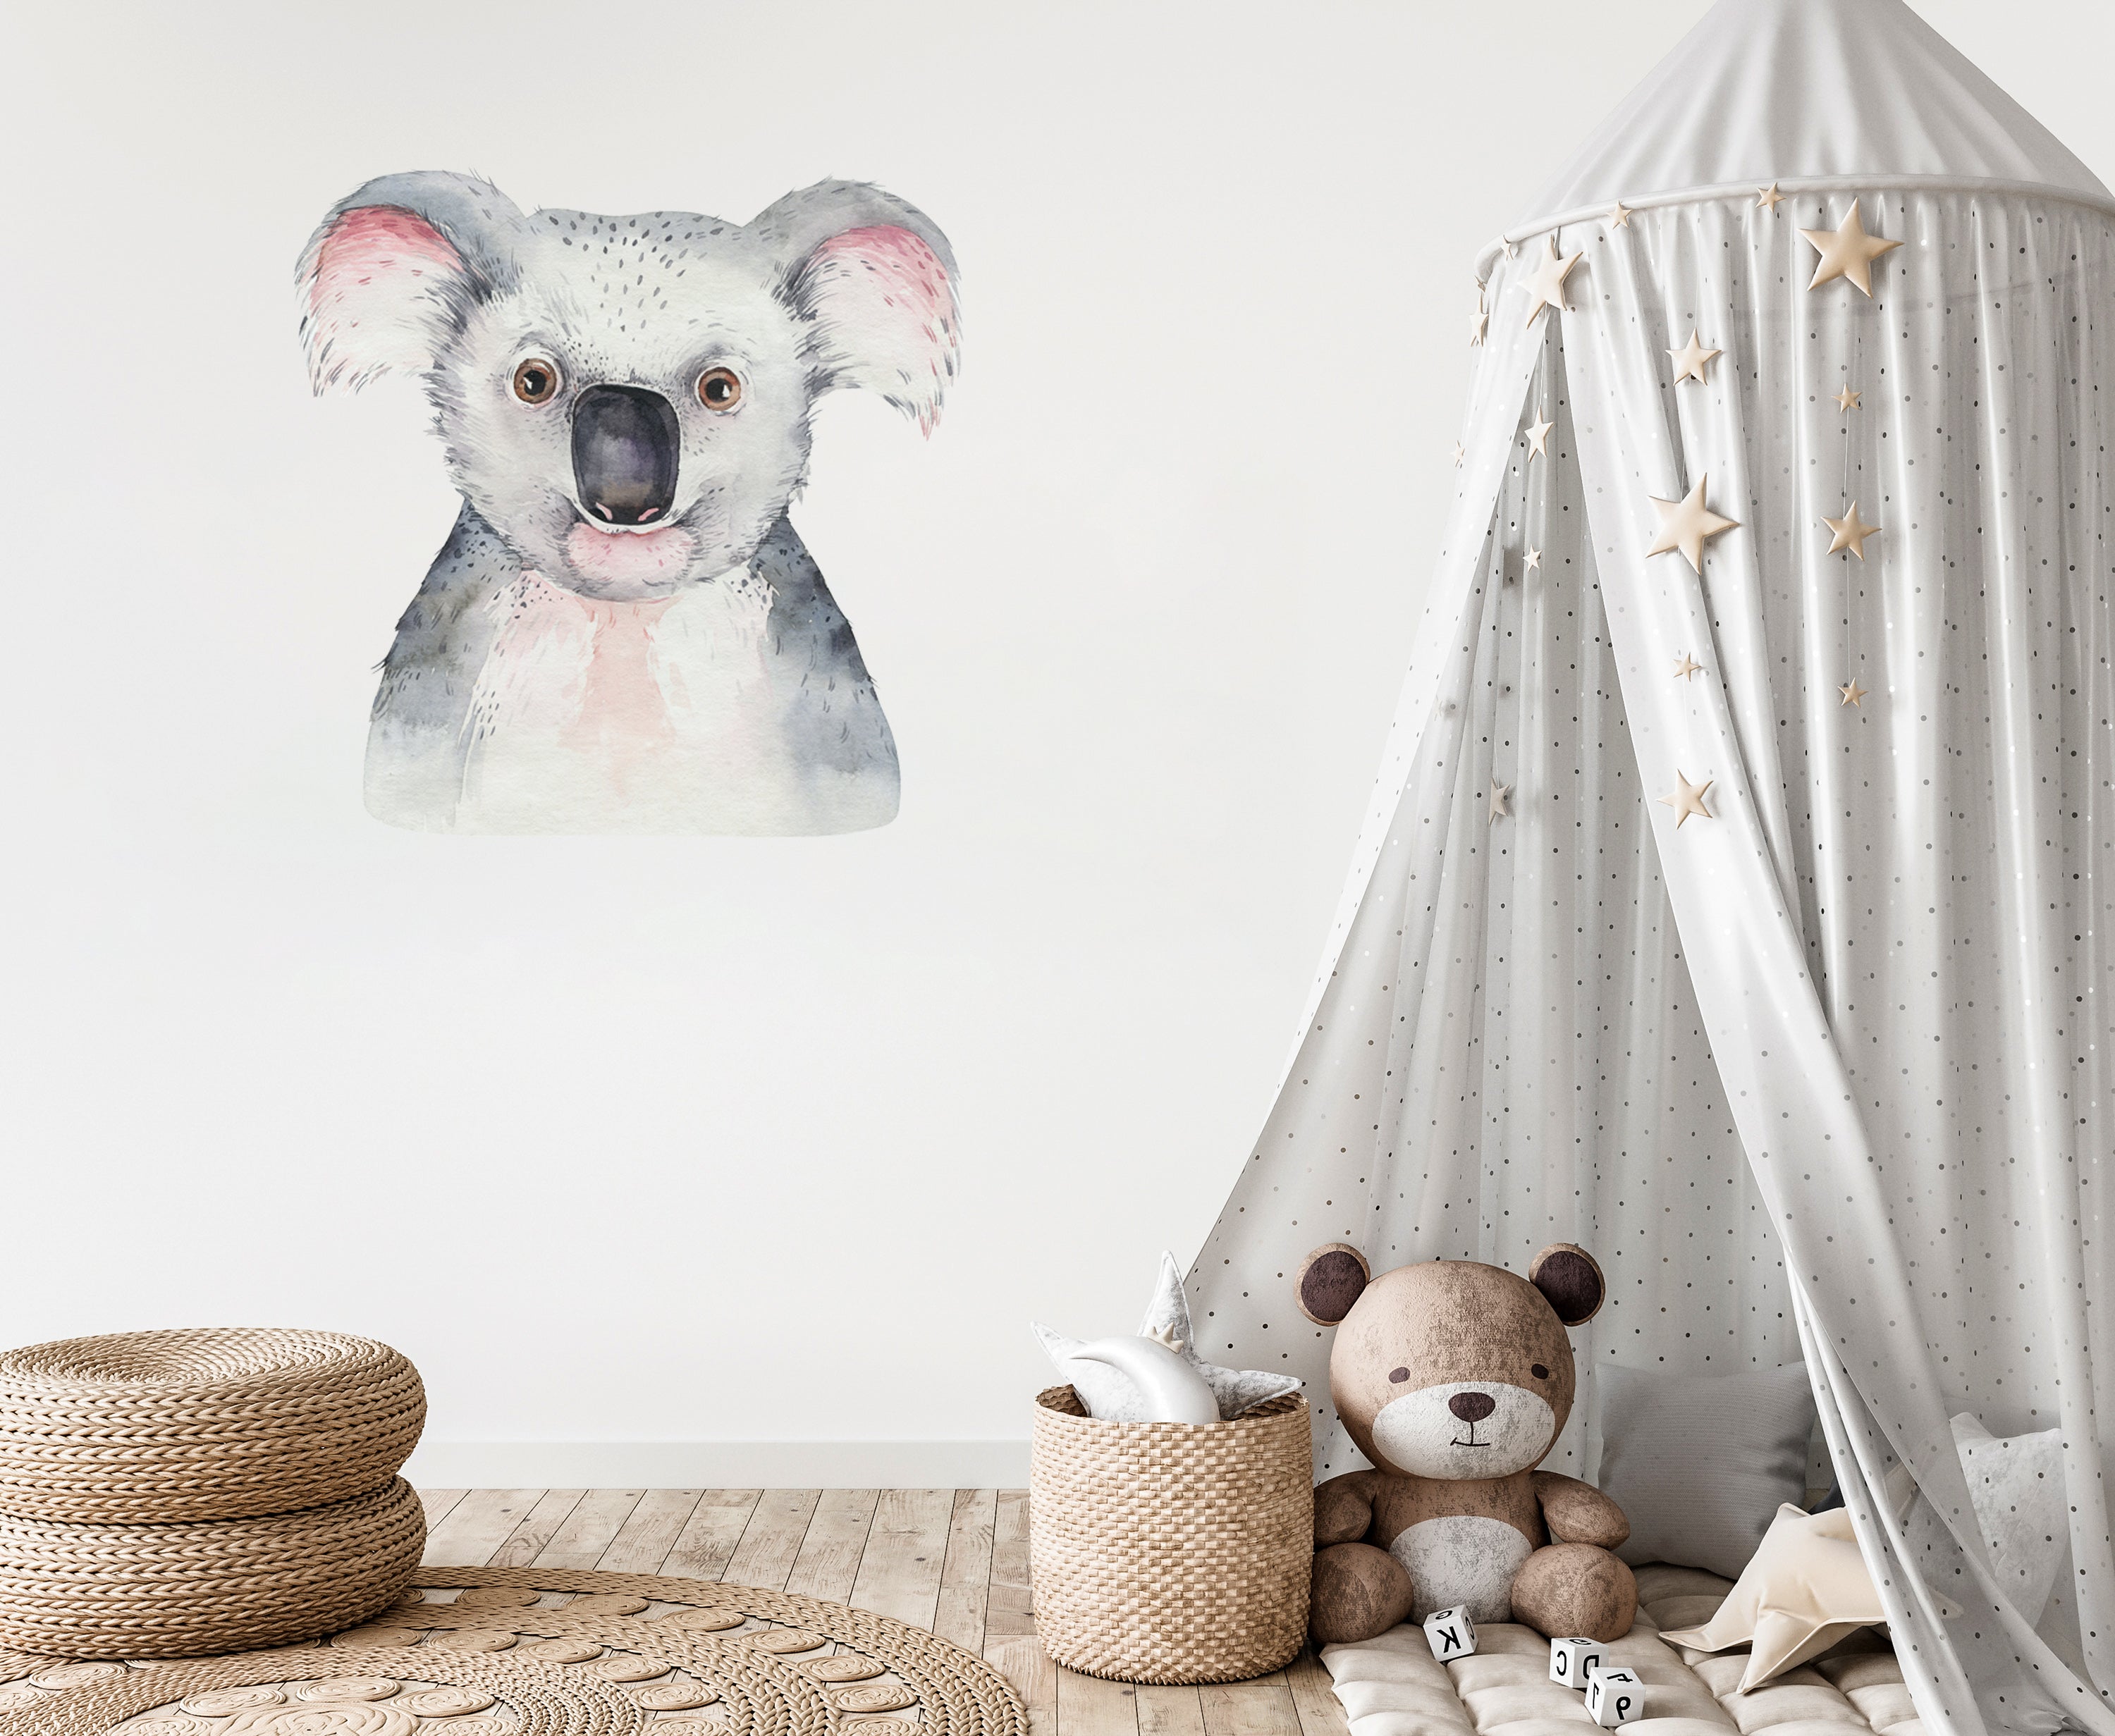 Water Color Panda Bear, Wall Decal Sticker, Removable with NO wall Damage!